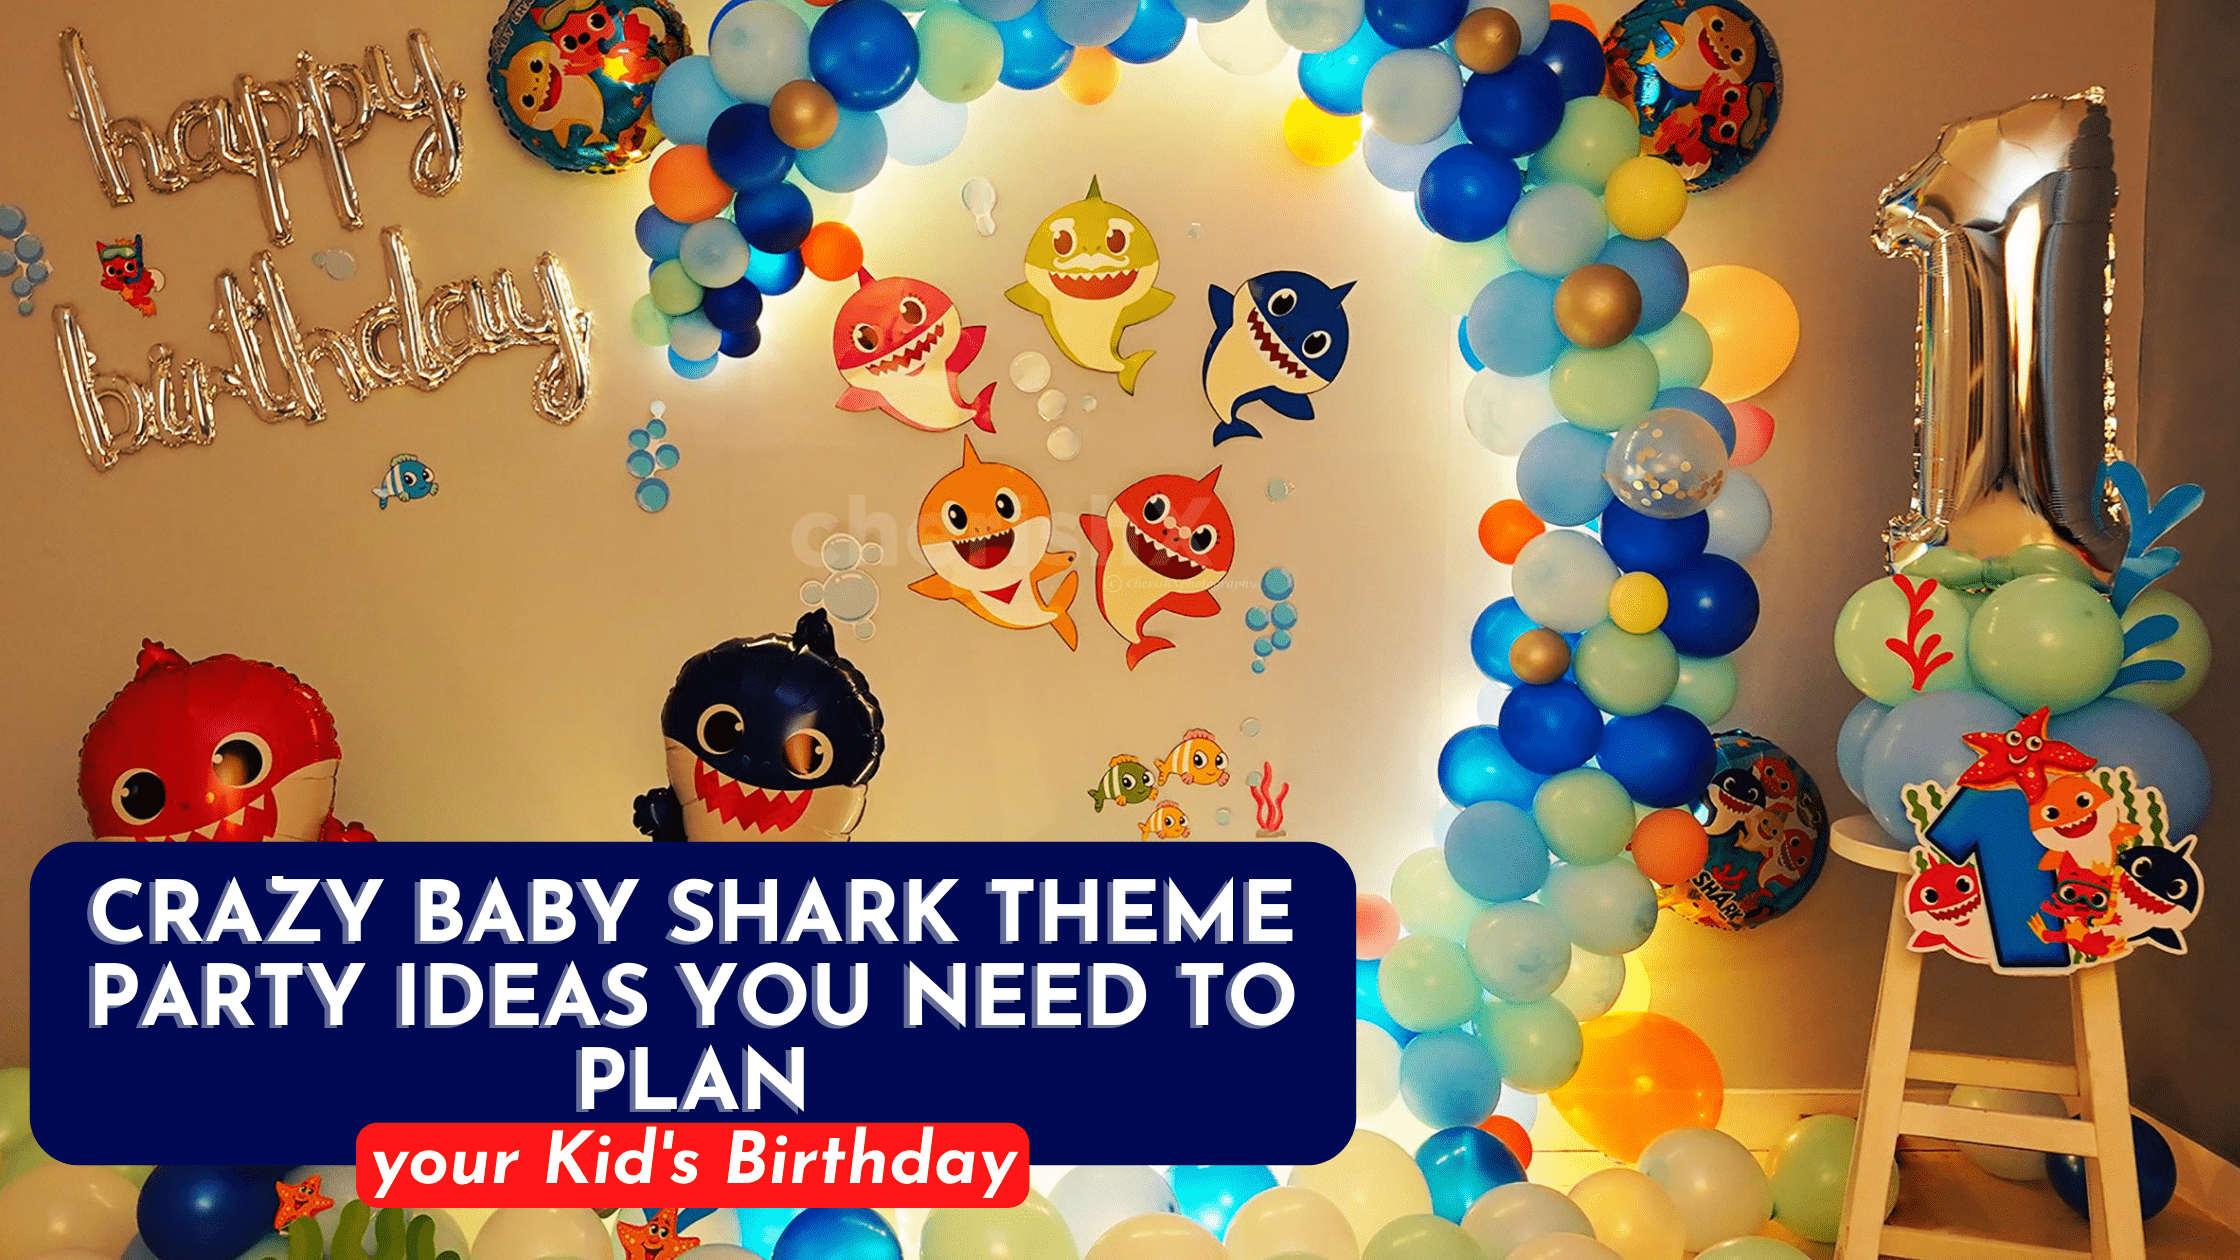 Crazy Baby Shark Theme Party Ideas you need to plan your Kid’s Birthday